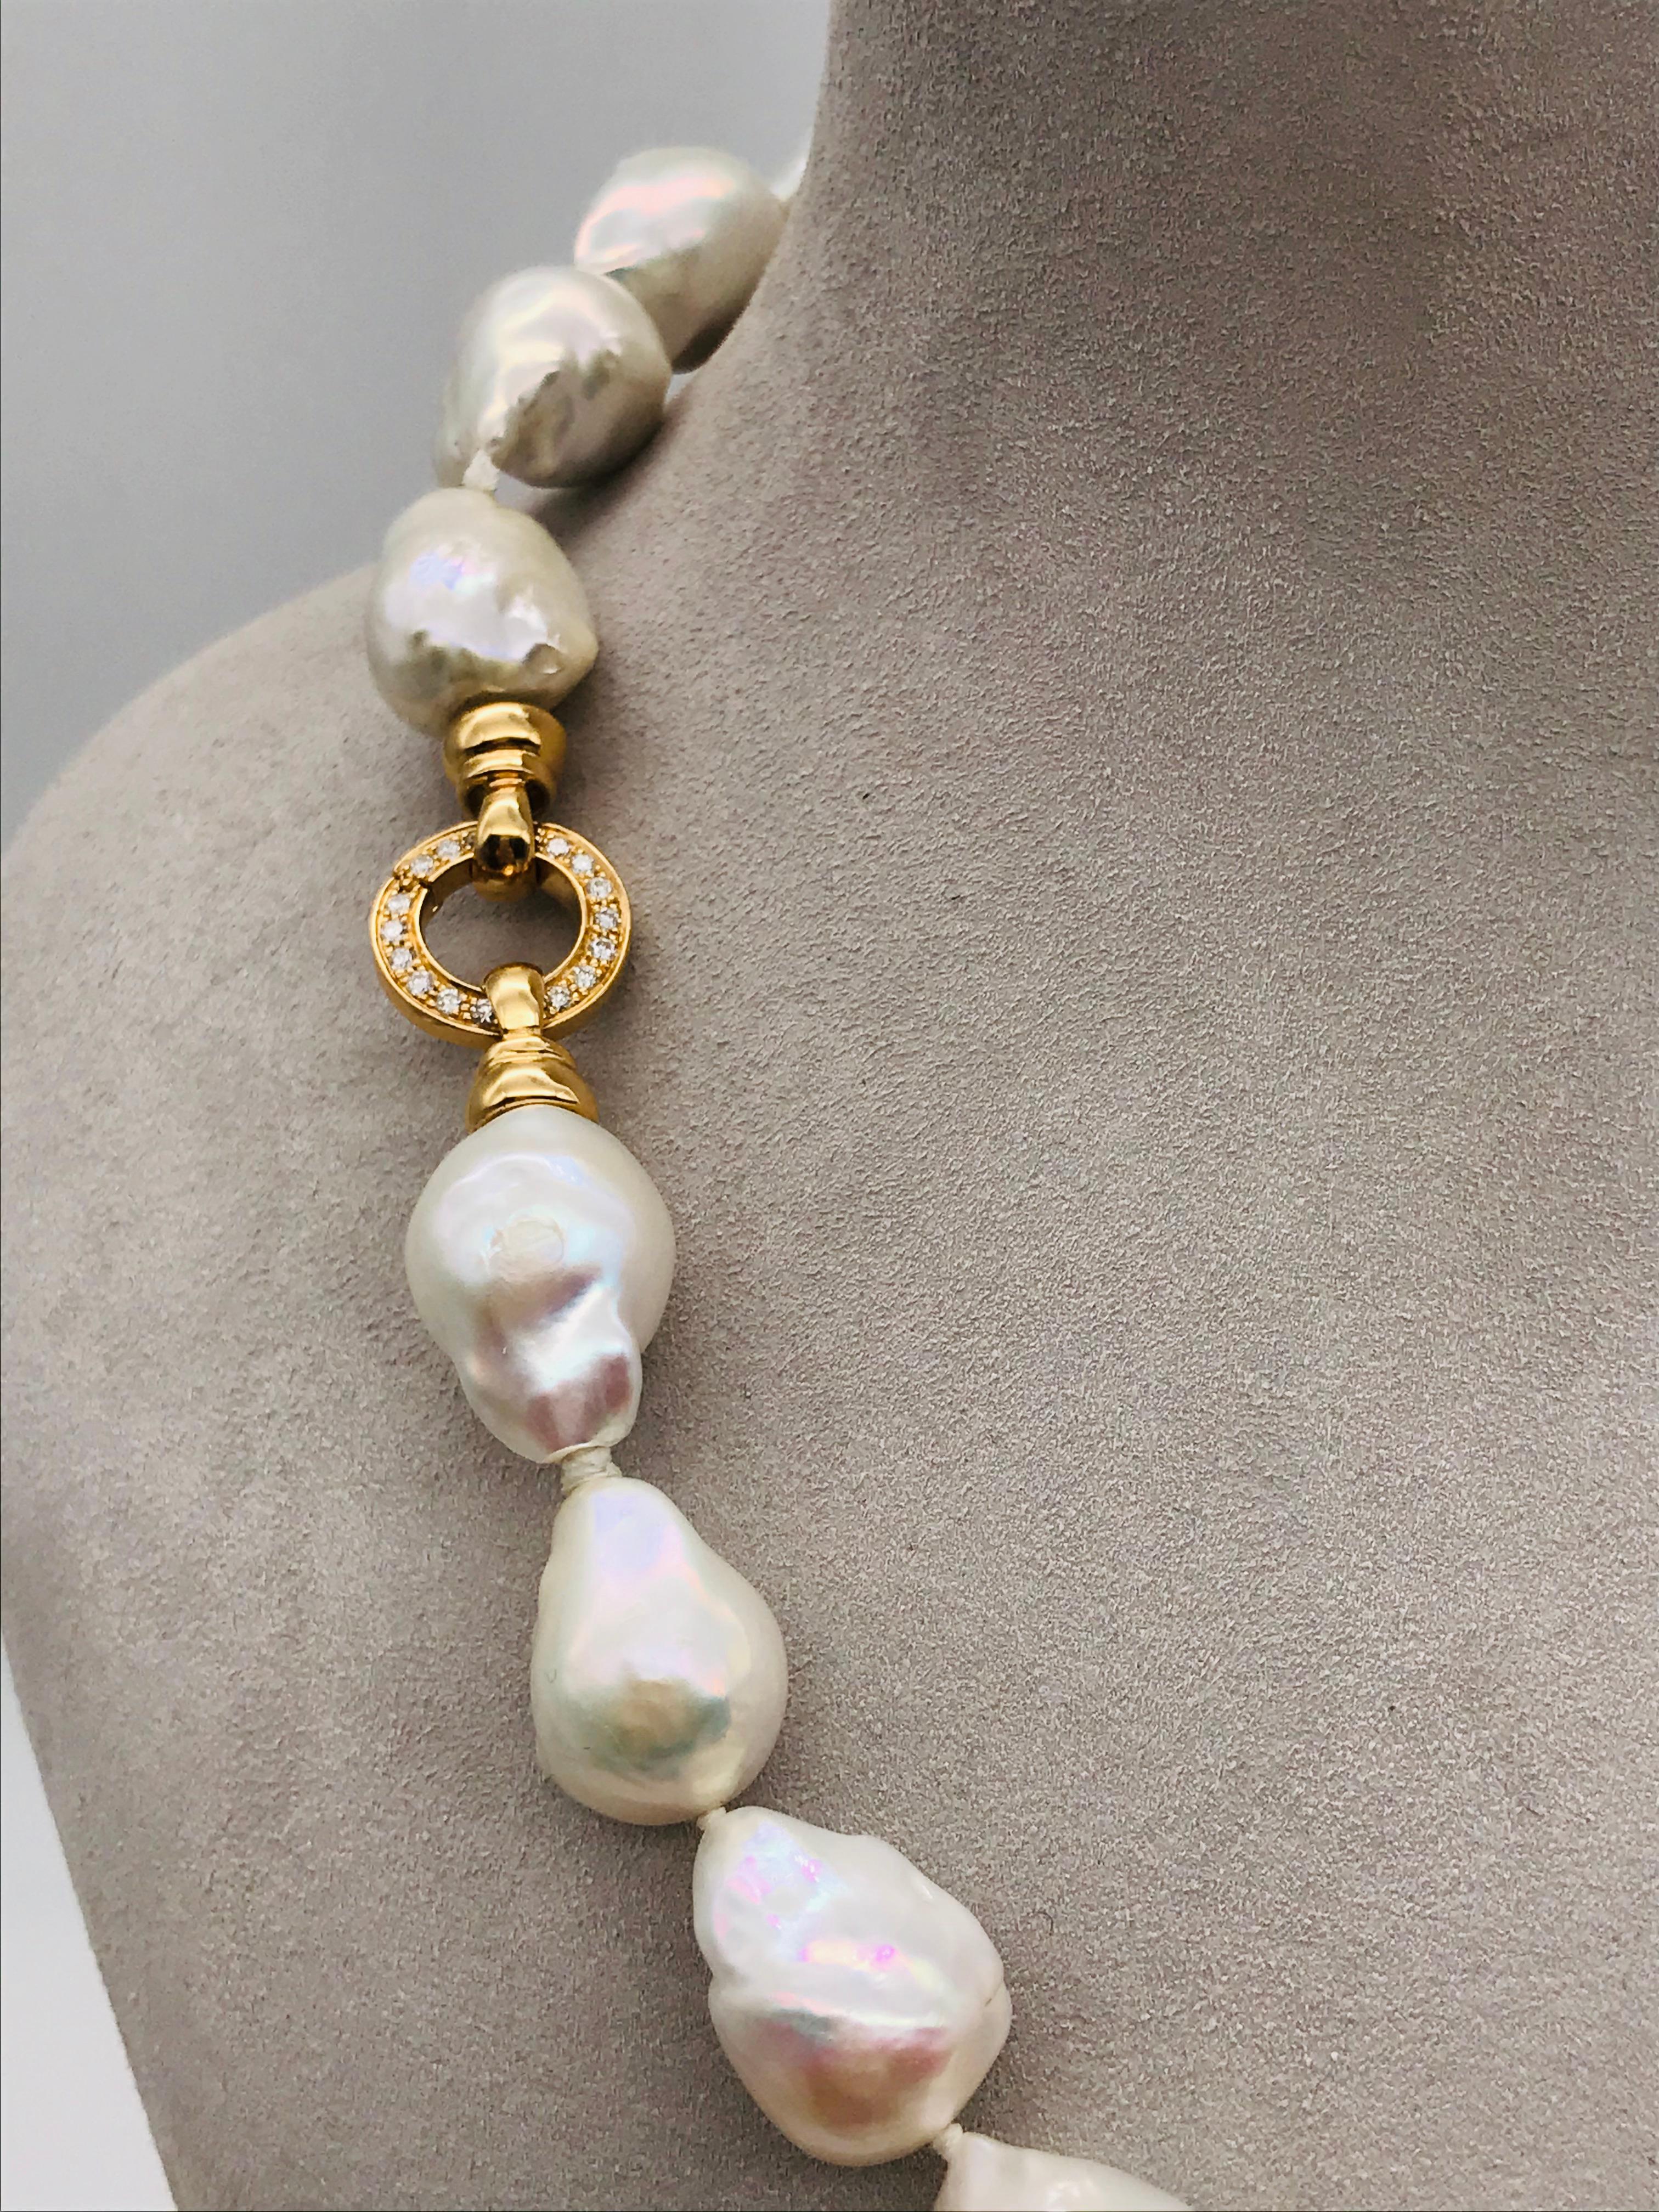 Women's Baroques Pearls Necklaces with Gold and Diamonds Clasp